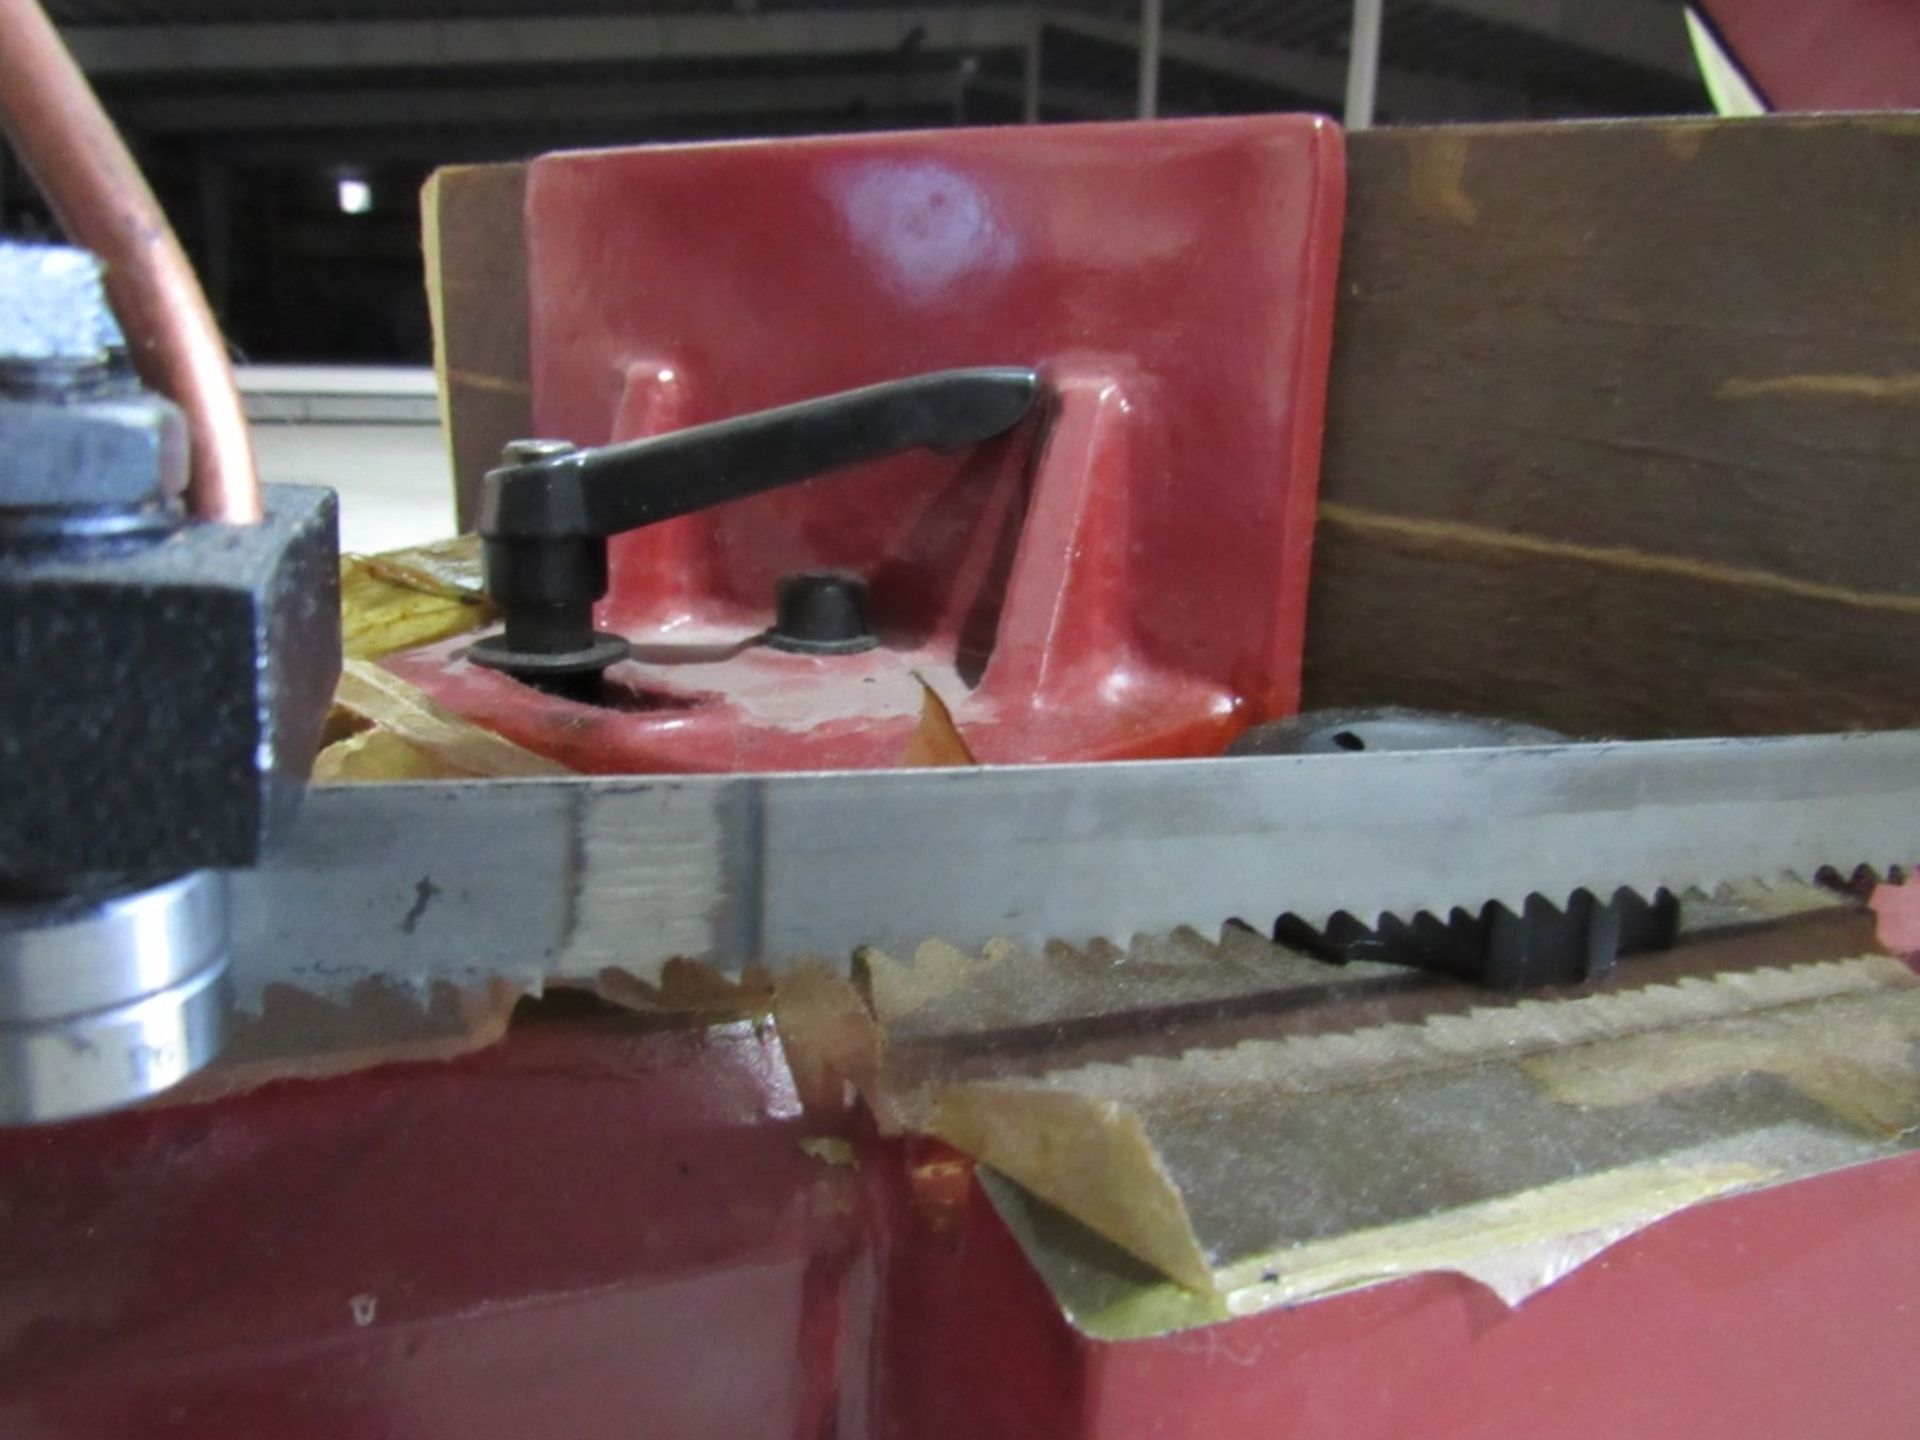 Metal Band Saw- Model - BS-712N 1.1 KW 115/230 Volts 1 Phase 60 Hz Overall Dimensions - 4' x 16" x - Image 7 of 14